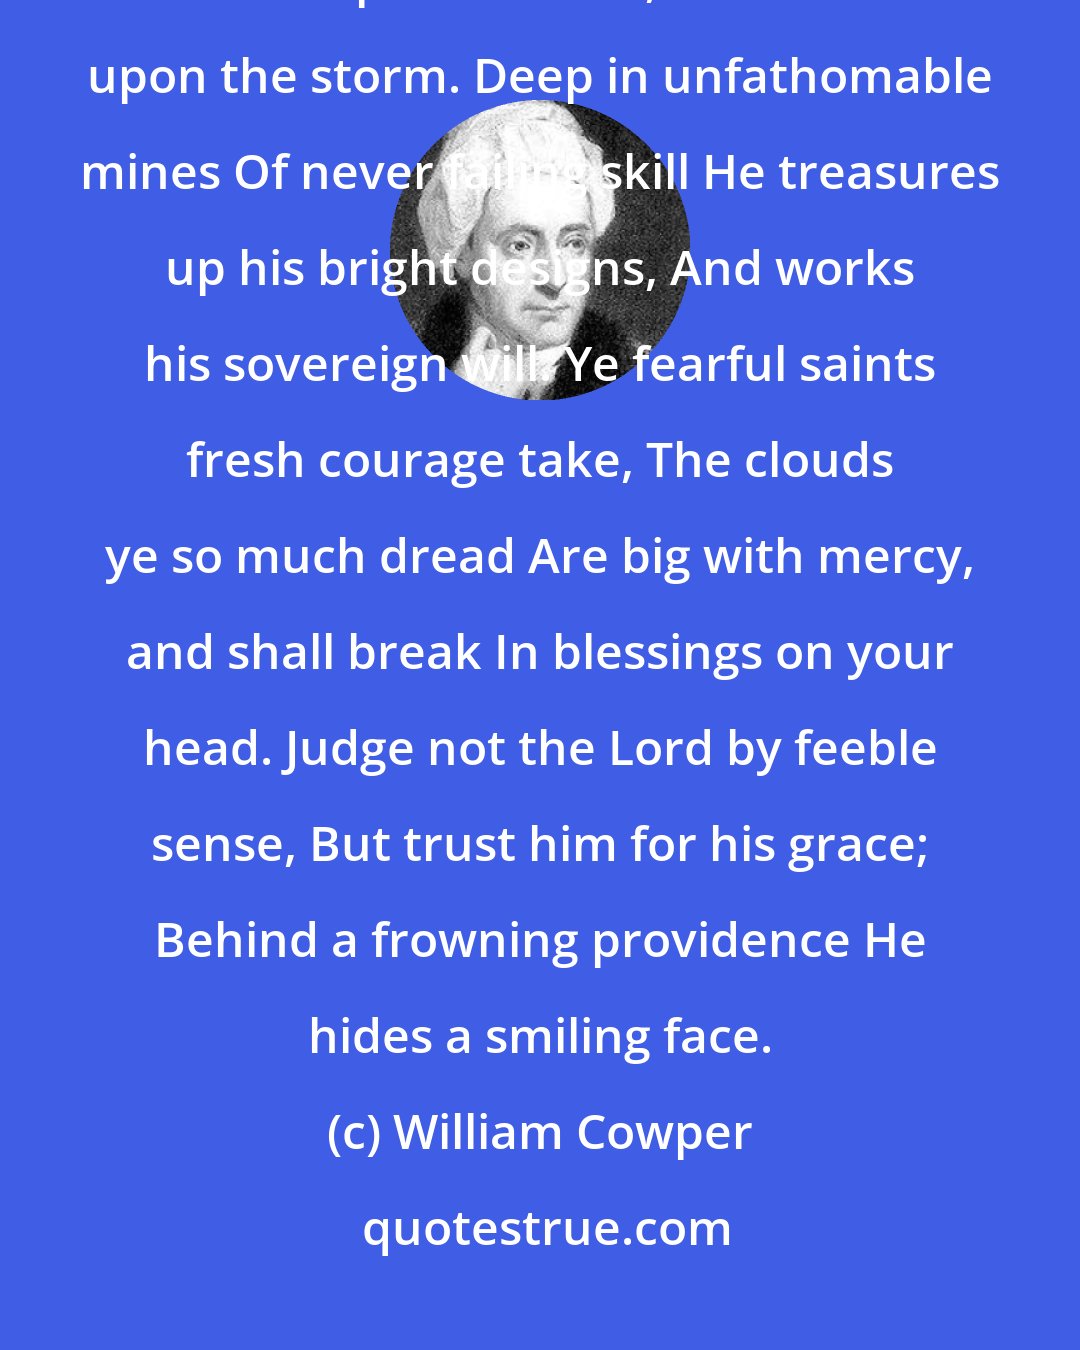 William Cowper: God moves in a mysterious way His wonders to perform; He plants his footsteps in the sea, And rides upon the storm. Deep in unfathomable mines Of never failing skill He treasures up his bright designs, And works his sovereign will. Ye fearful saints fresh courage take, The clouds ye so much dread Are big with mercy, and shall break In blessings on your head. Judge not the Lord by feeble sense, But trust him for his grace; Behind a frowning providence He hides a smiling face.